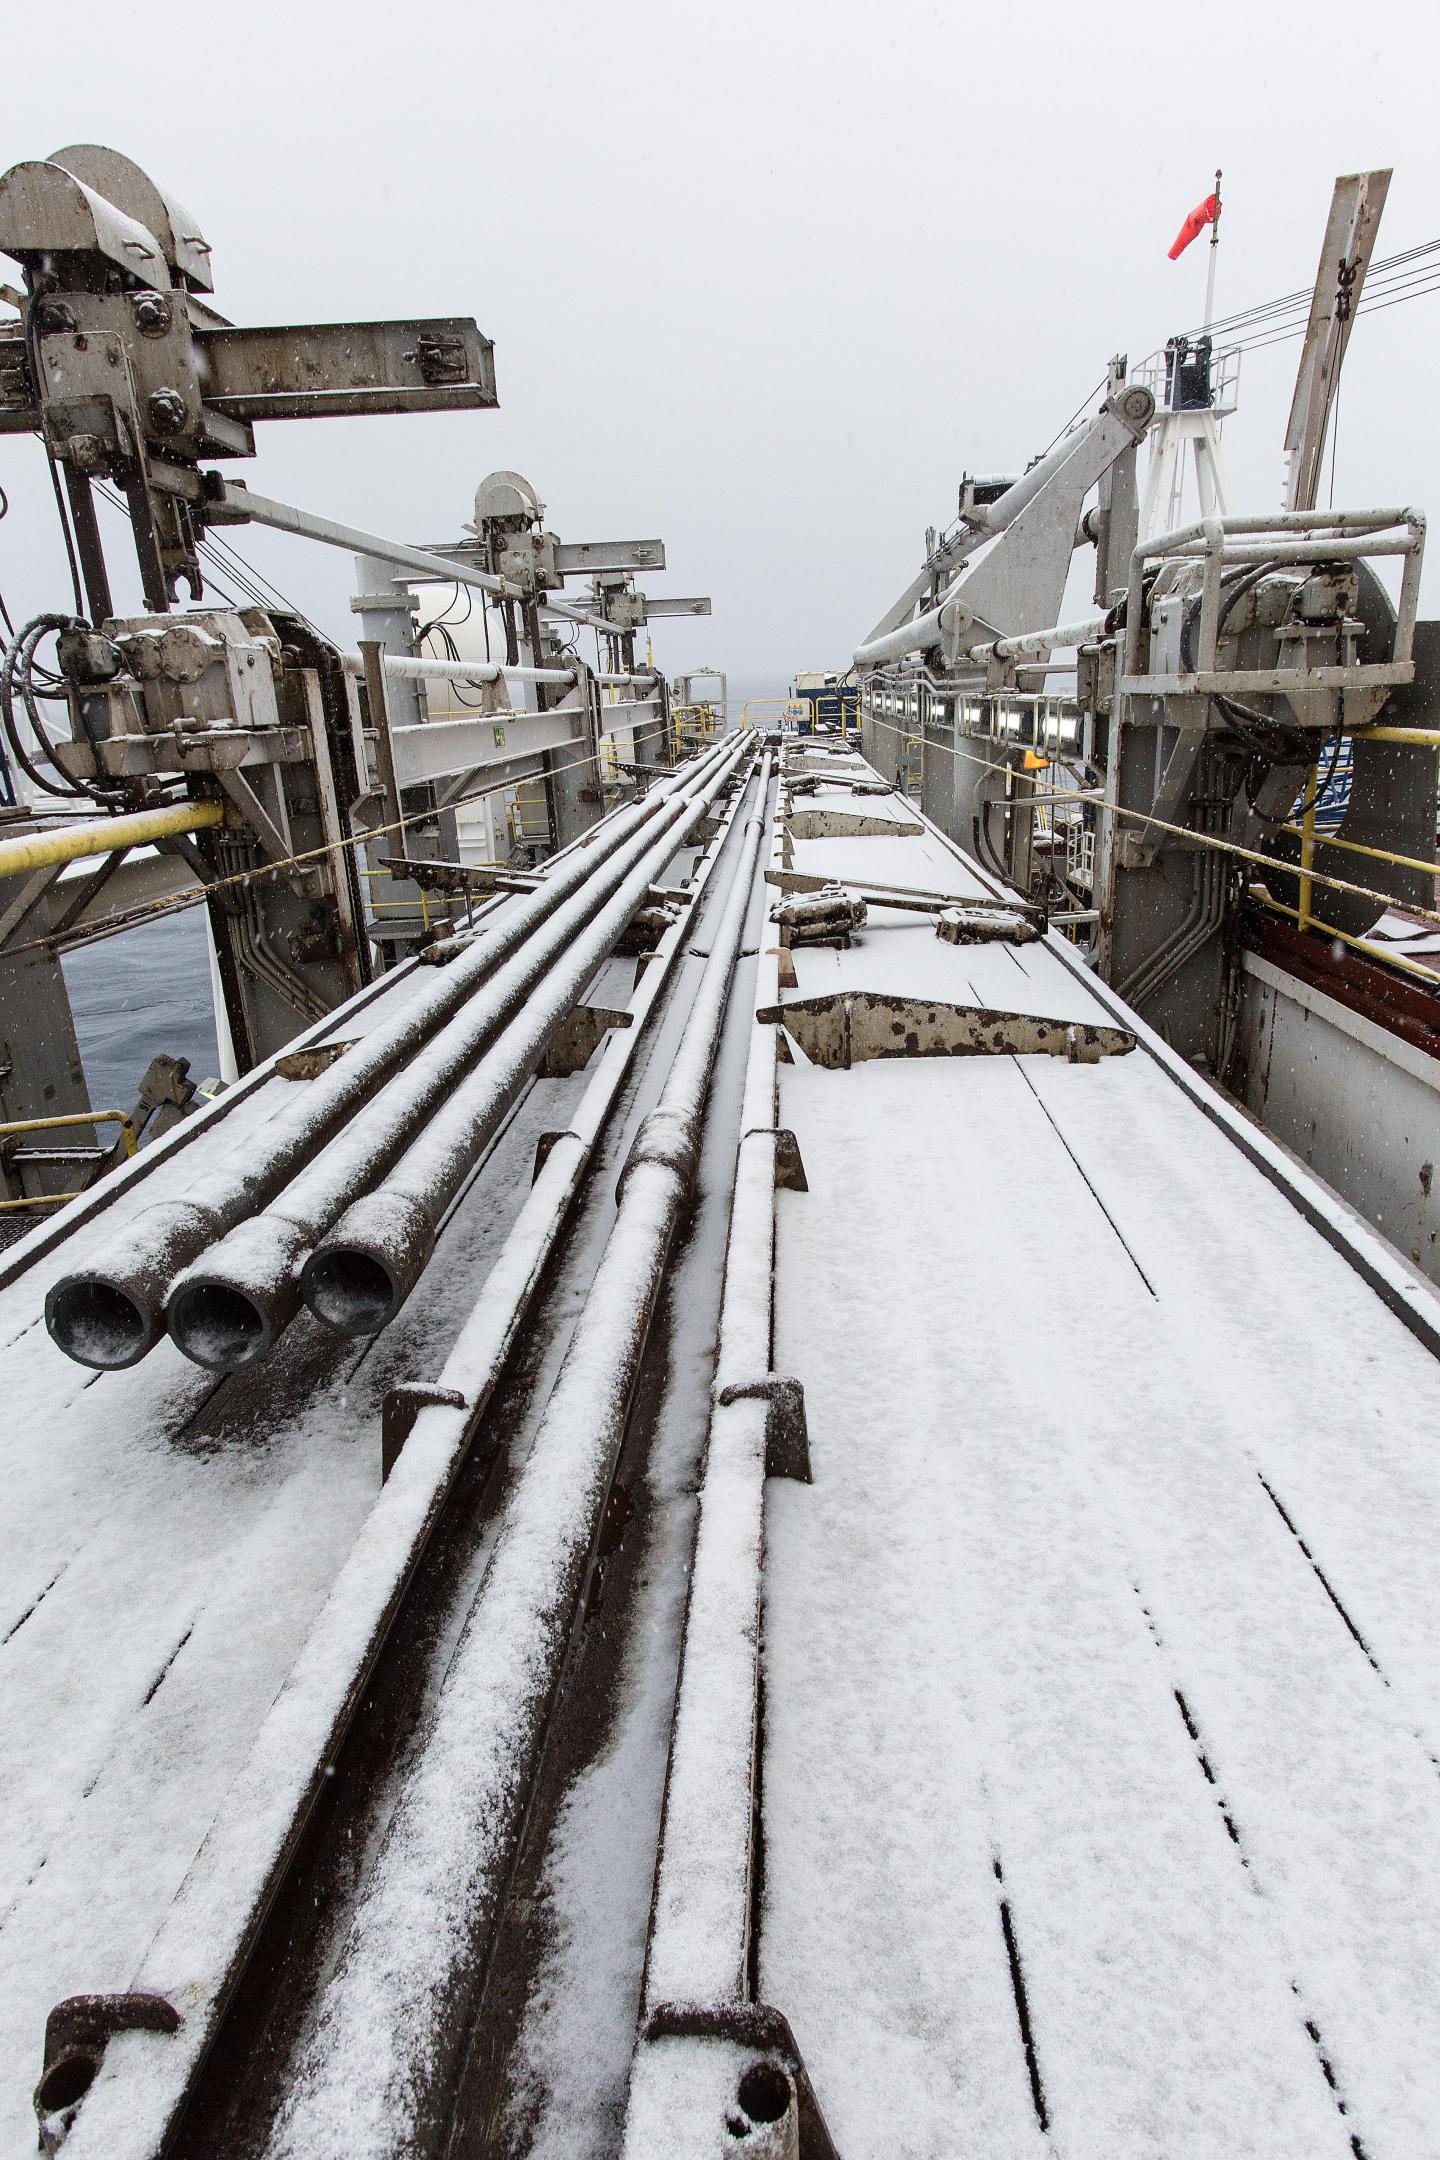 Snow-Covered Drilling Equipment